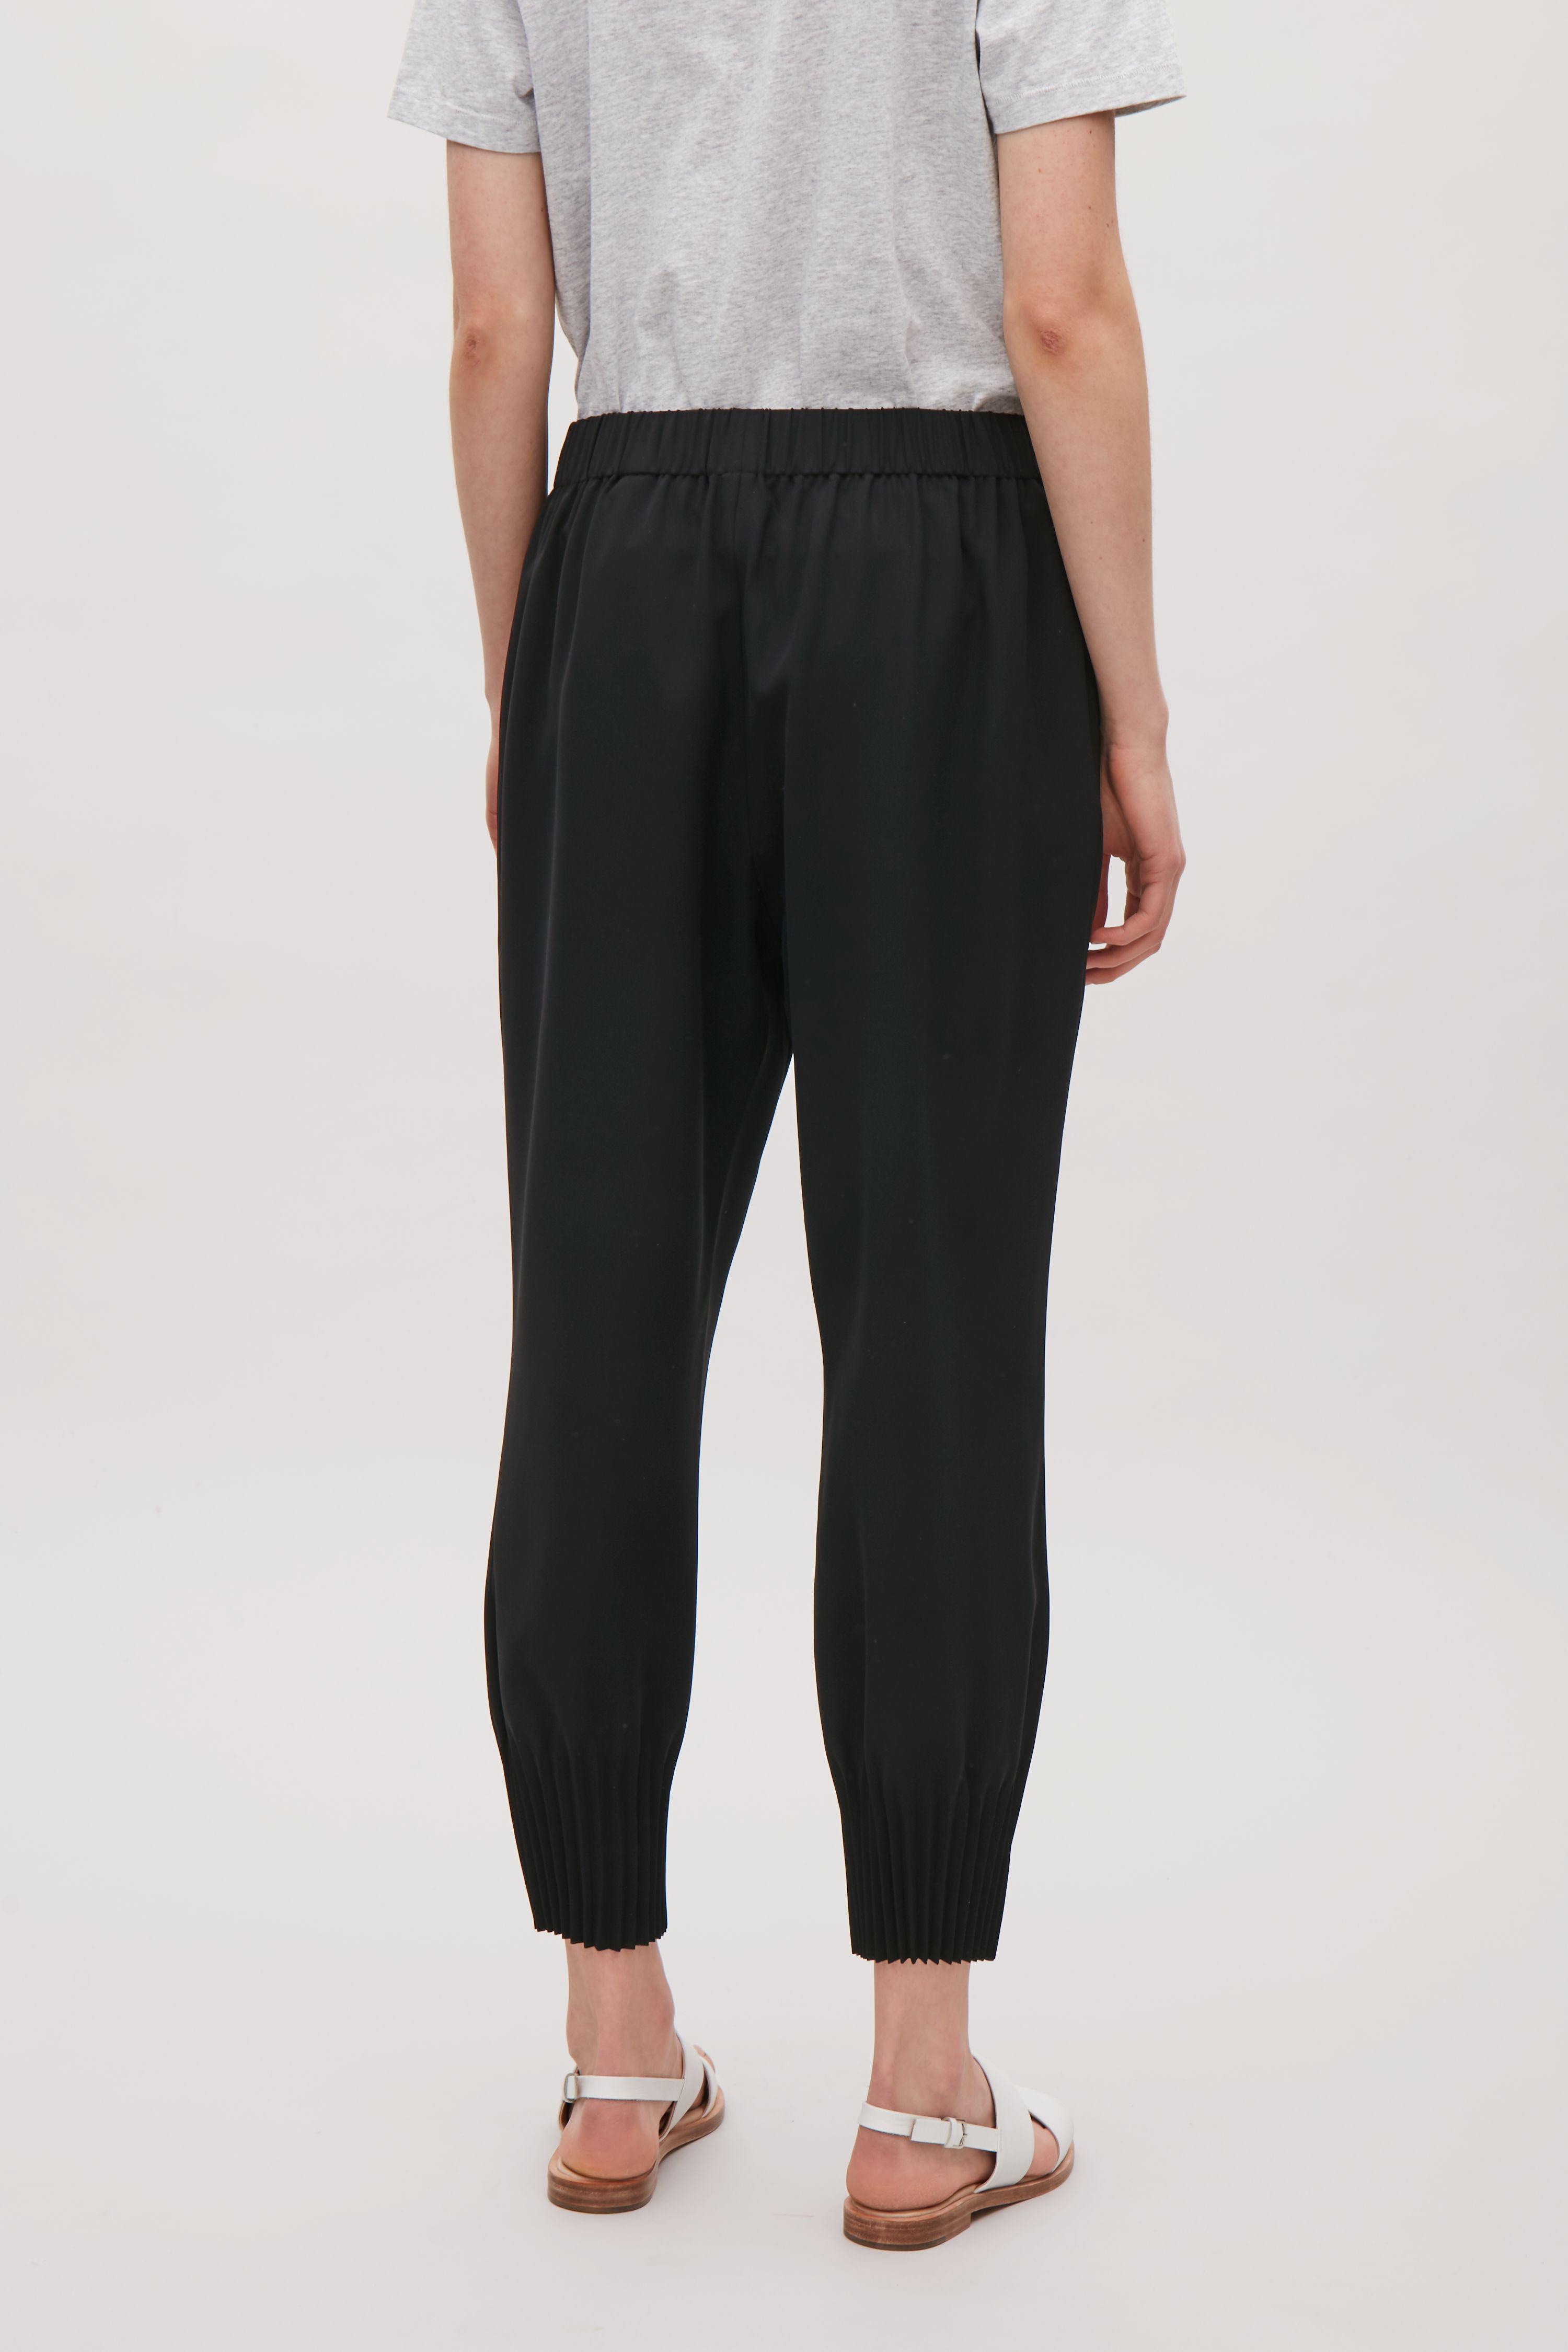 Closet Synthetic Closet Blu Pleated Hem Trouser in Black Slacks and Chinos Straight-leg trousers Womens Clothing Trousers 